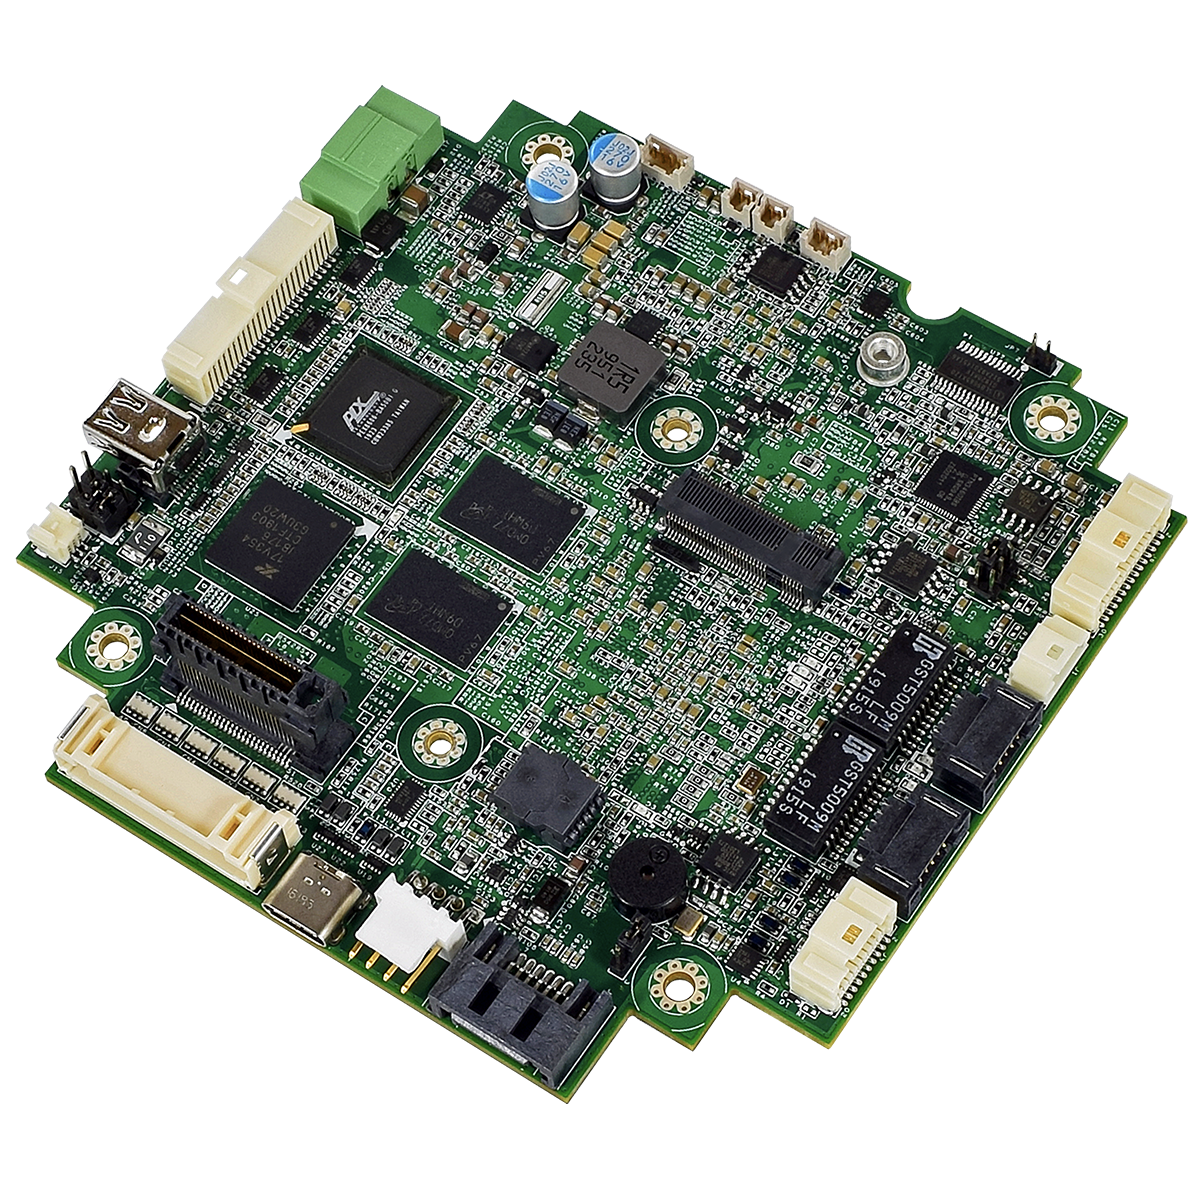 The WINSYSTEMS PX1-C441 is a PC/104 OneBank™ Intel® Apollo Lake-I SBC with Dual Ethernet